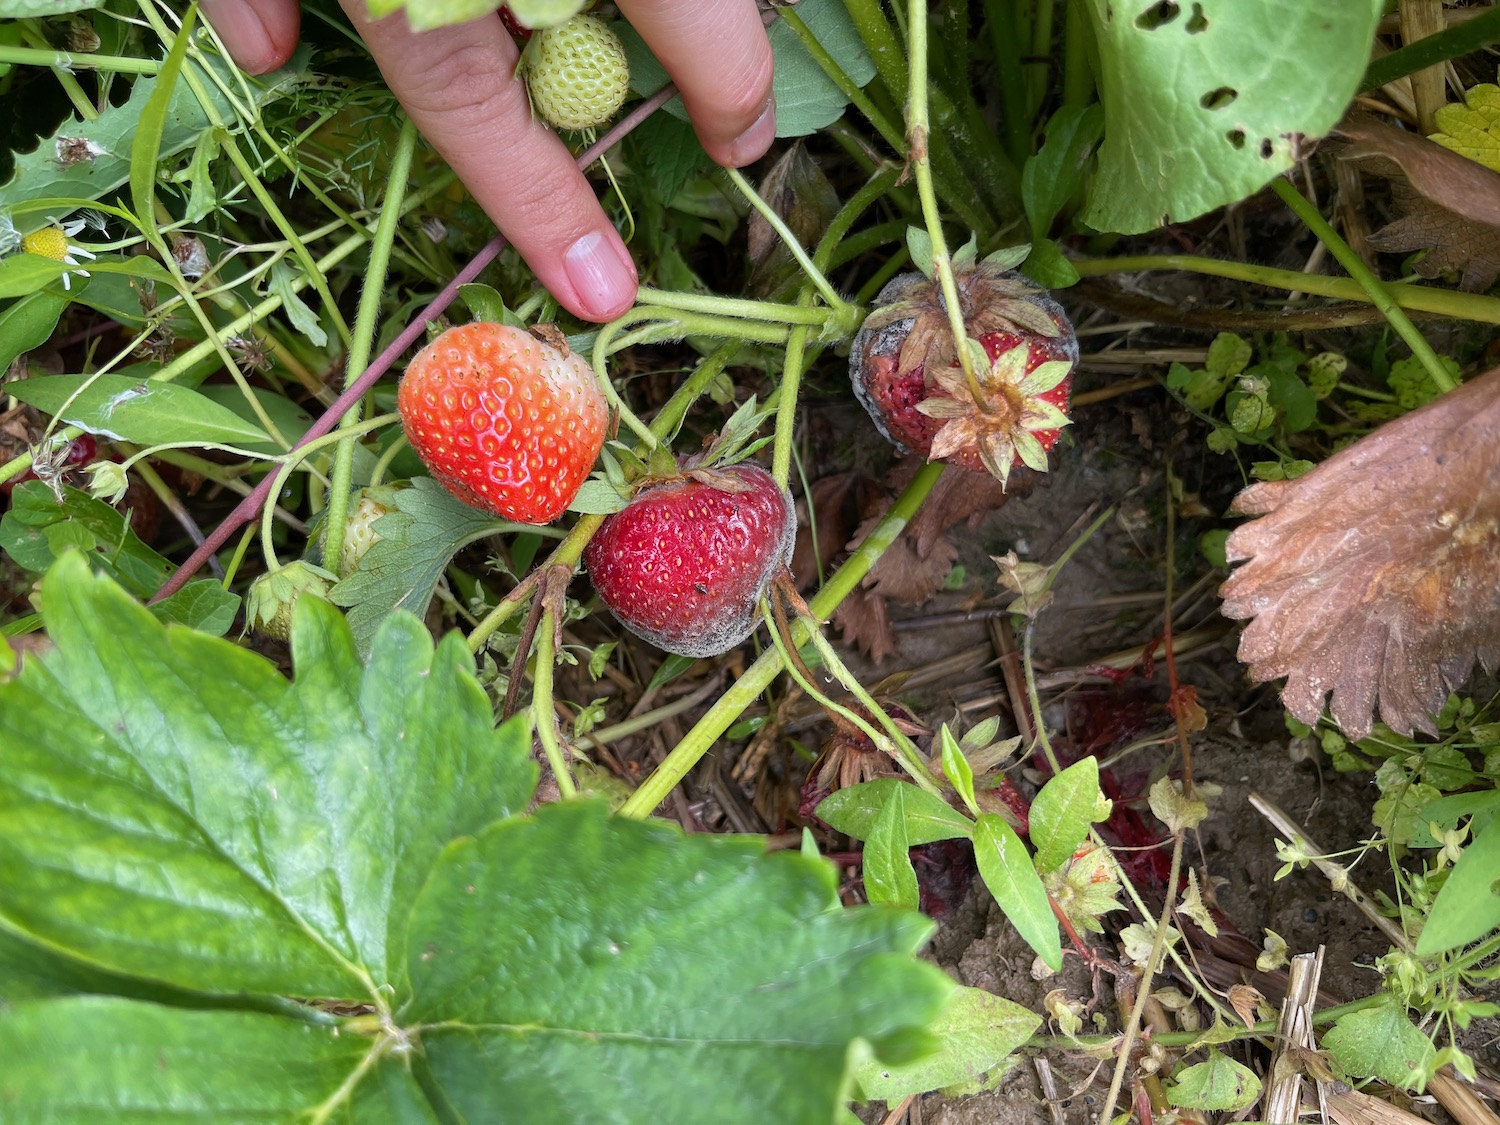 a hand picking strawberries from a plant